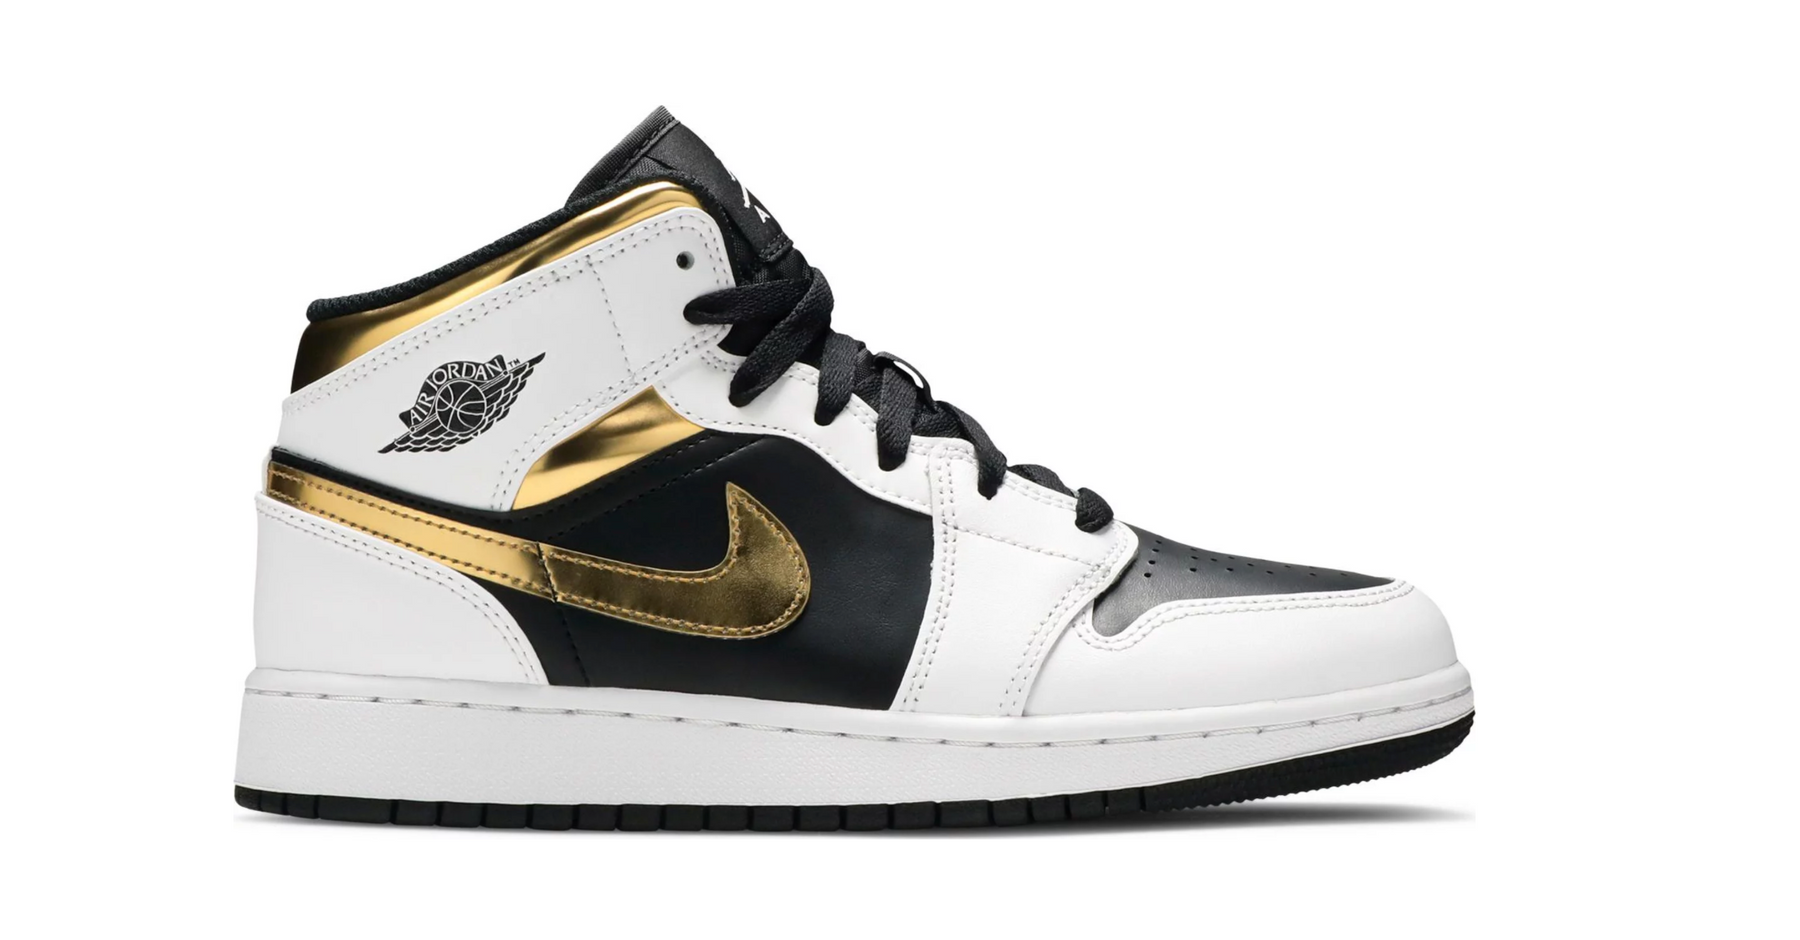 Nike Air Jordan 1 Mid White Gold Black (GS) Women's | Afterpay It Now ...